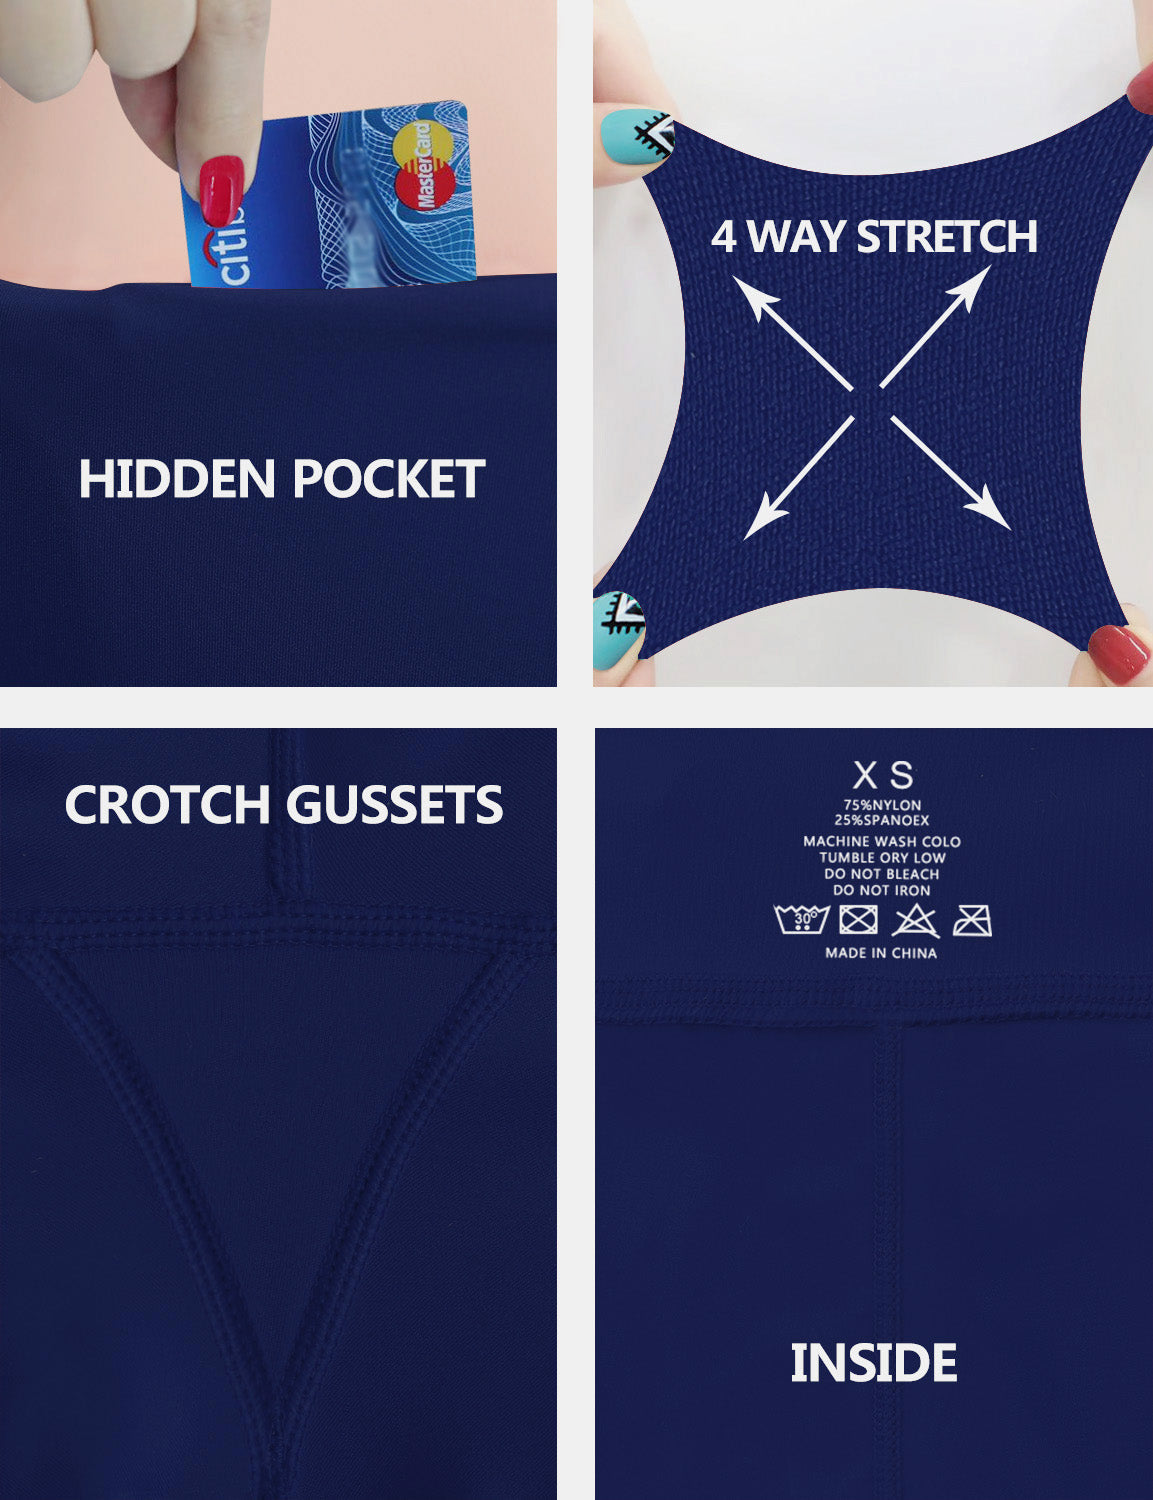 High Waist Running Pants navy 75%Nylon/25%Spandex Fabric doesn't attract lint easily 4-way stretch No see-through Moisture-wicking Tummy control Inner pocket Four lengths